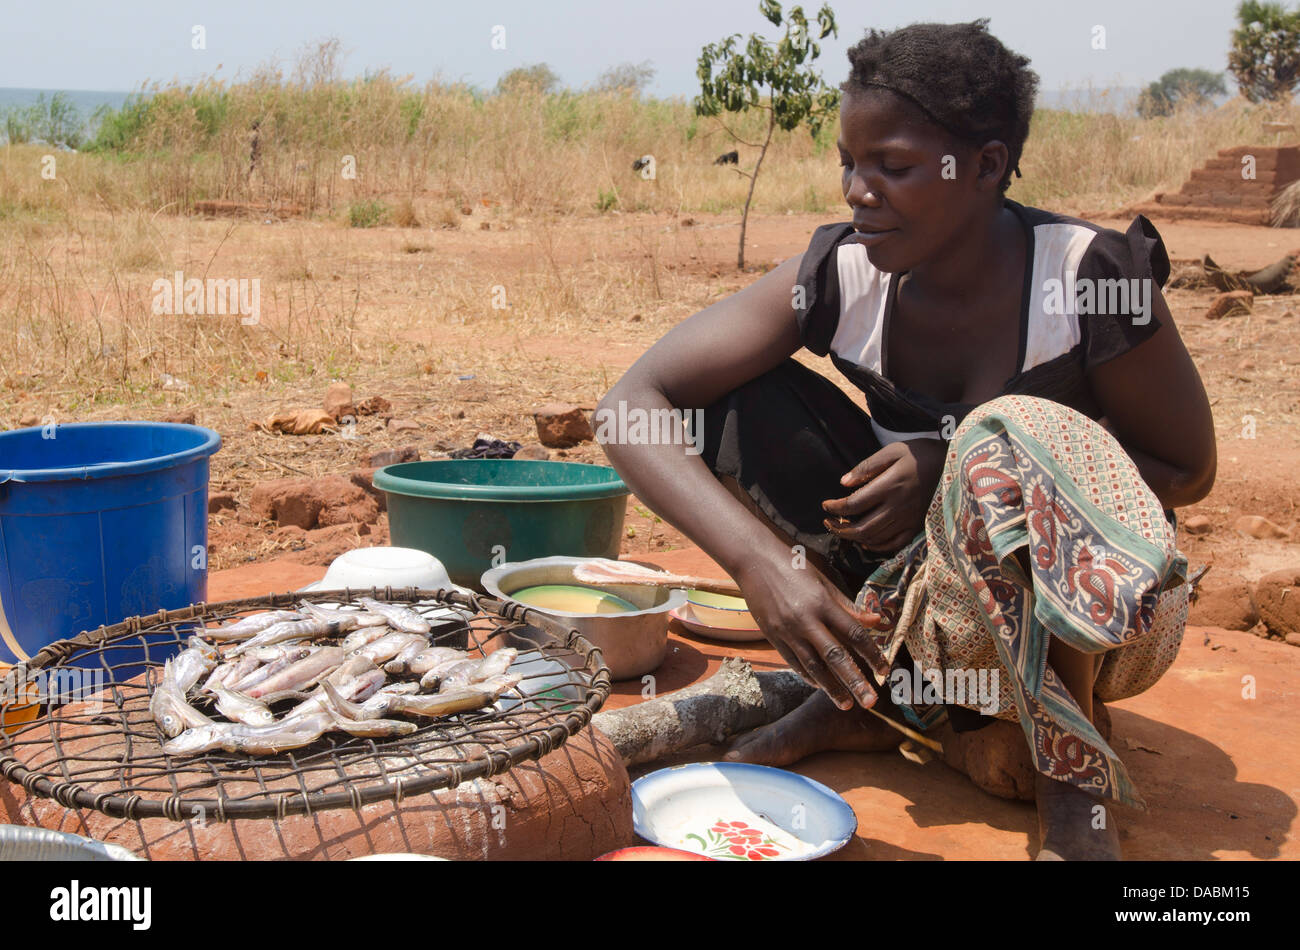 Lady preparing fish for meal, Talpia, Zambia, Africa Stock Photo